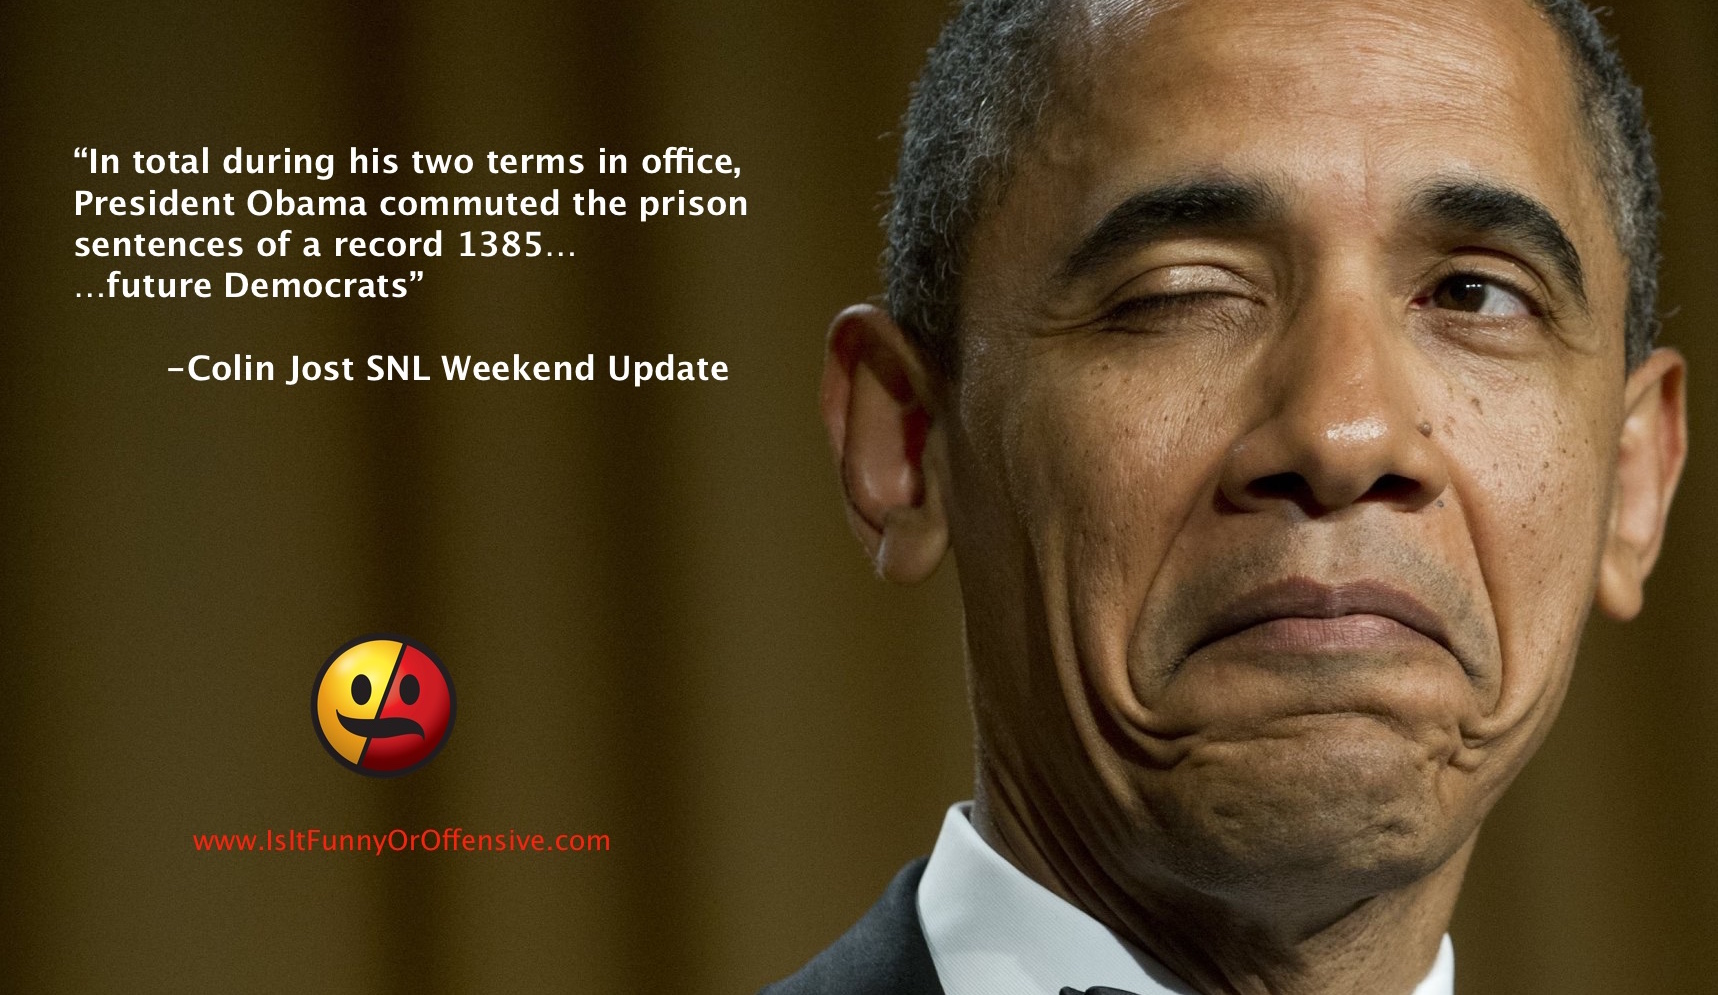 SNL Weekend Update on Obama Commuted Sentences